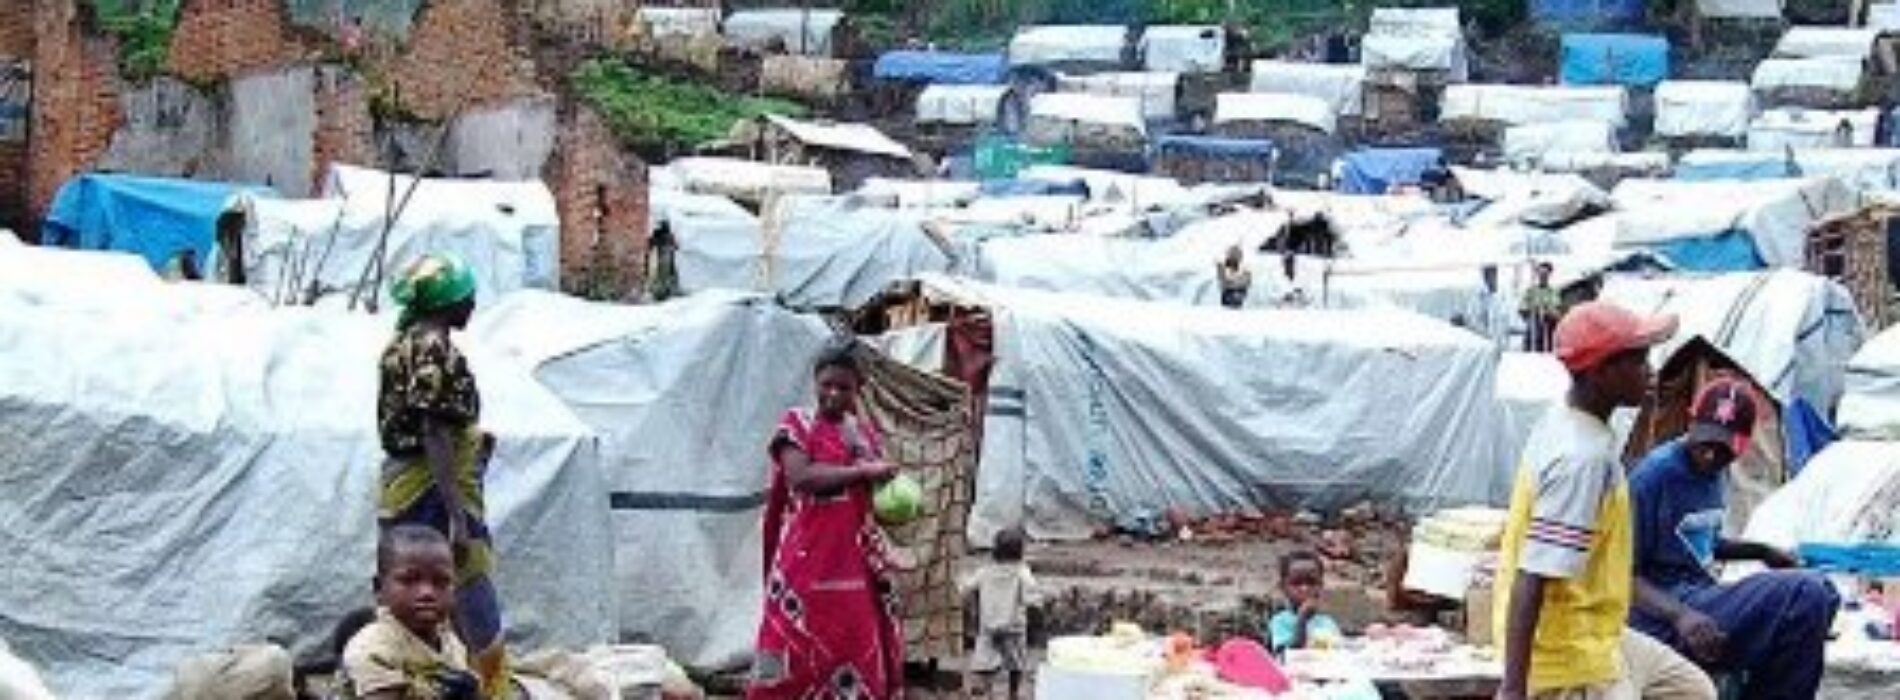 Flood victims: Midwives panic as 2 pregnant women go into labour in Rivers IDP camp